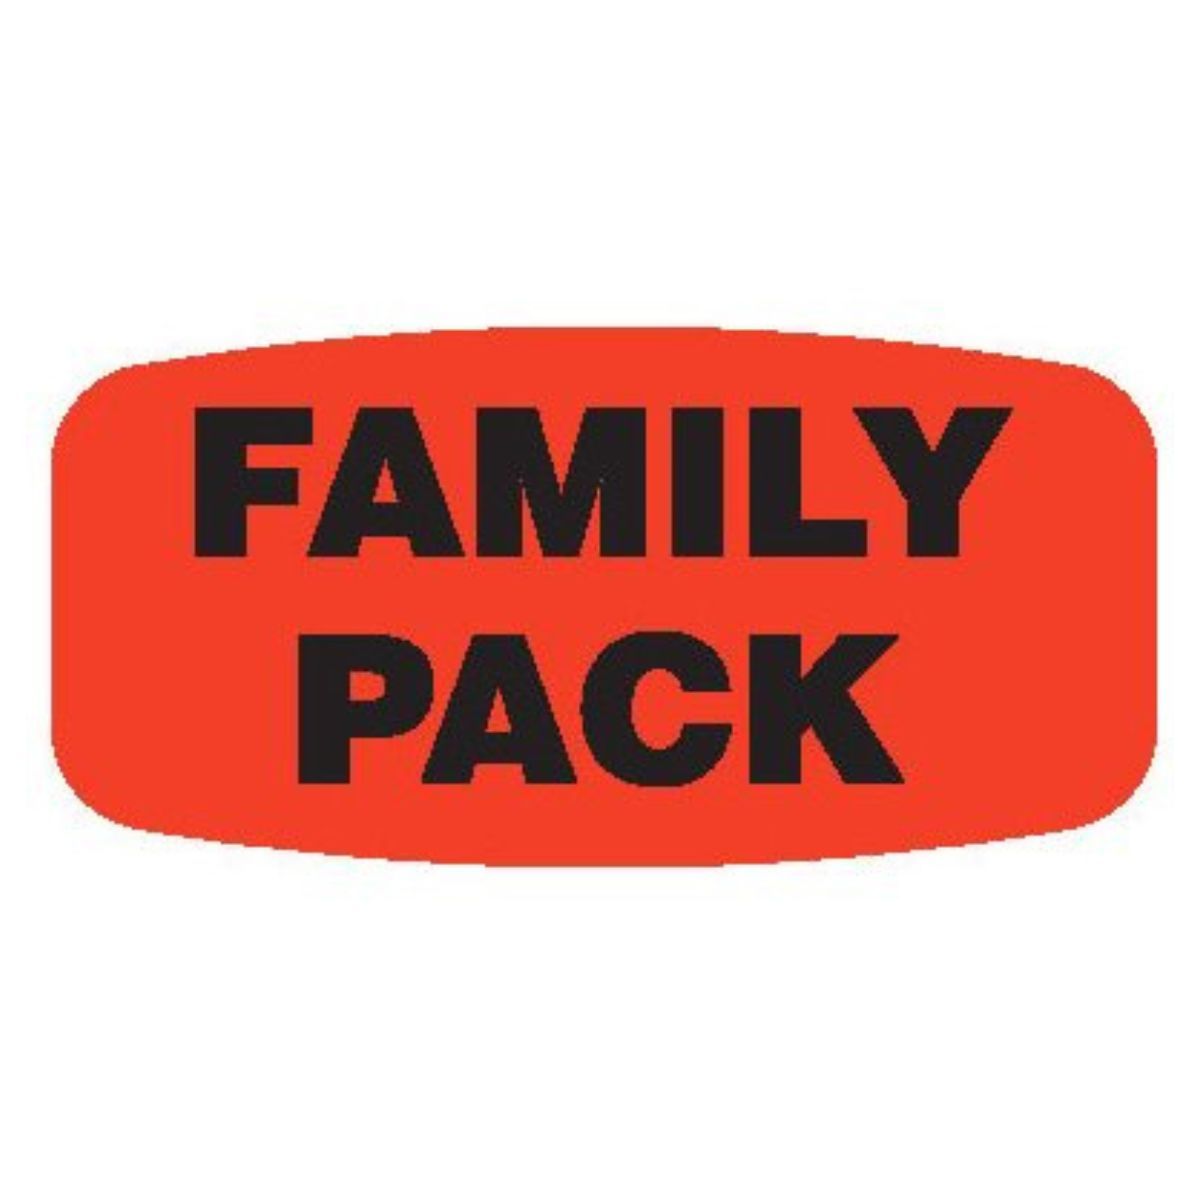 Bollin Label 12101 - Family Pack Small Rectangle Black on Red - Roll of 1000